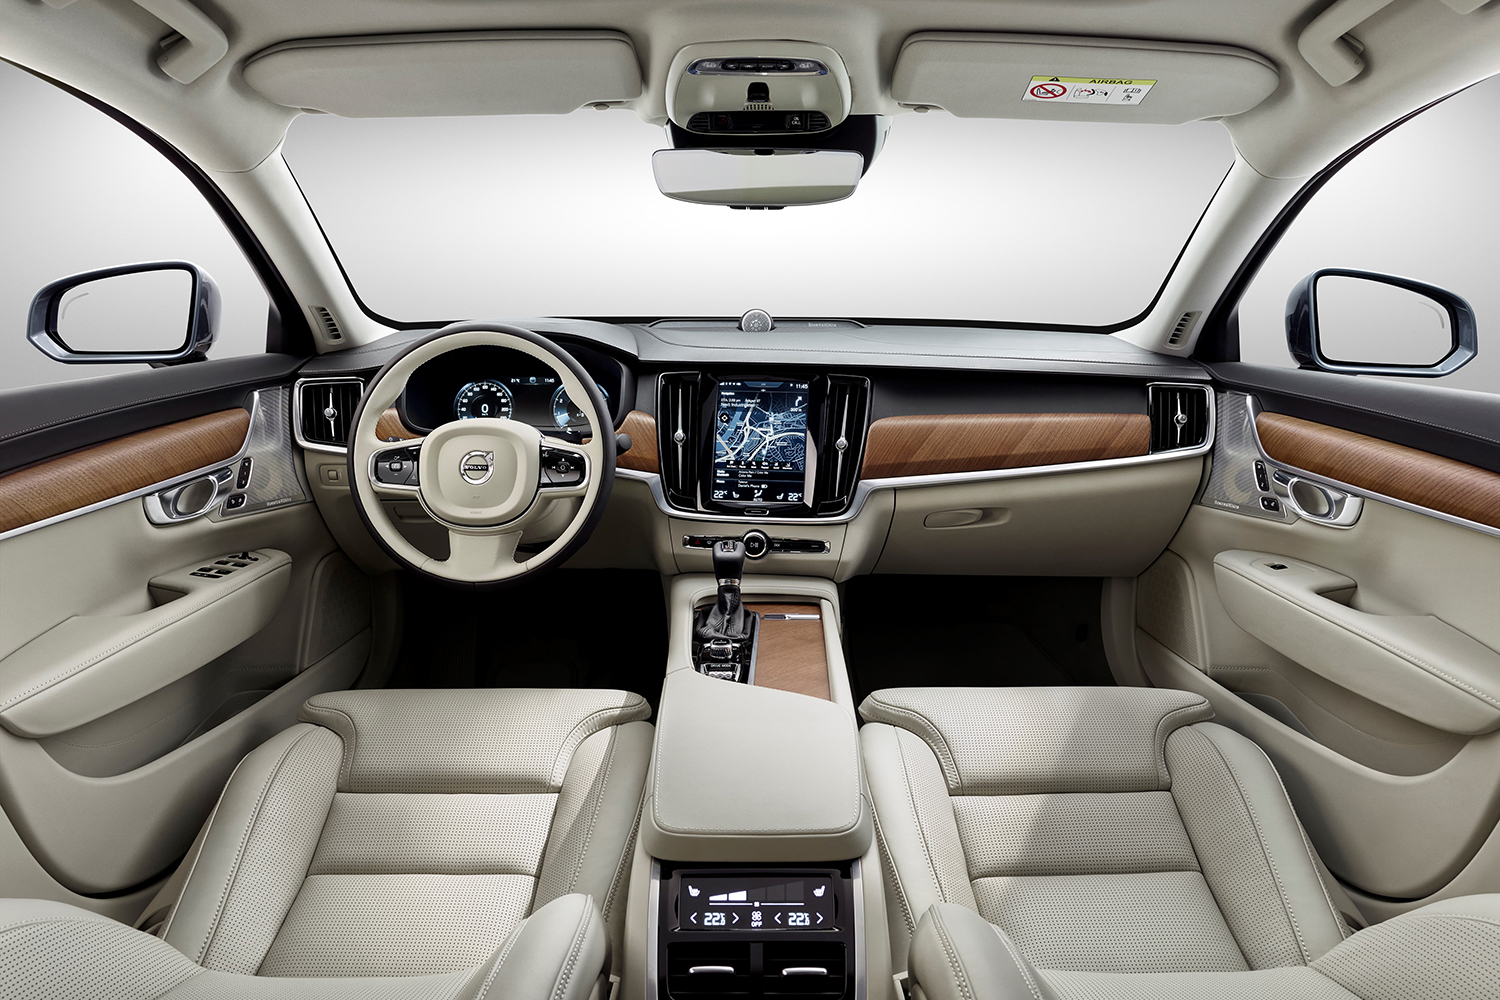 dt cars top stories of 2015 170101 interior blond volvo s90